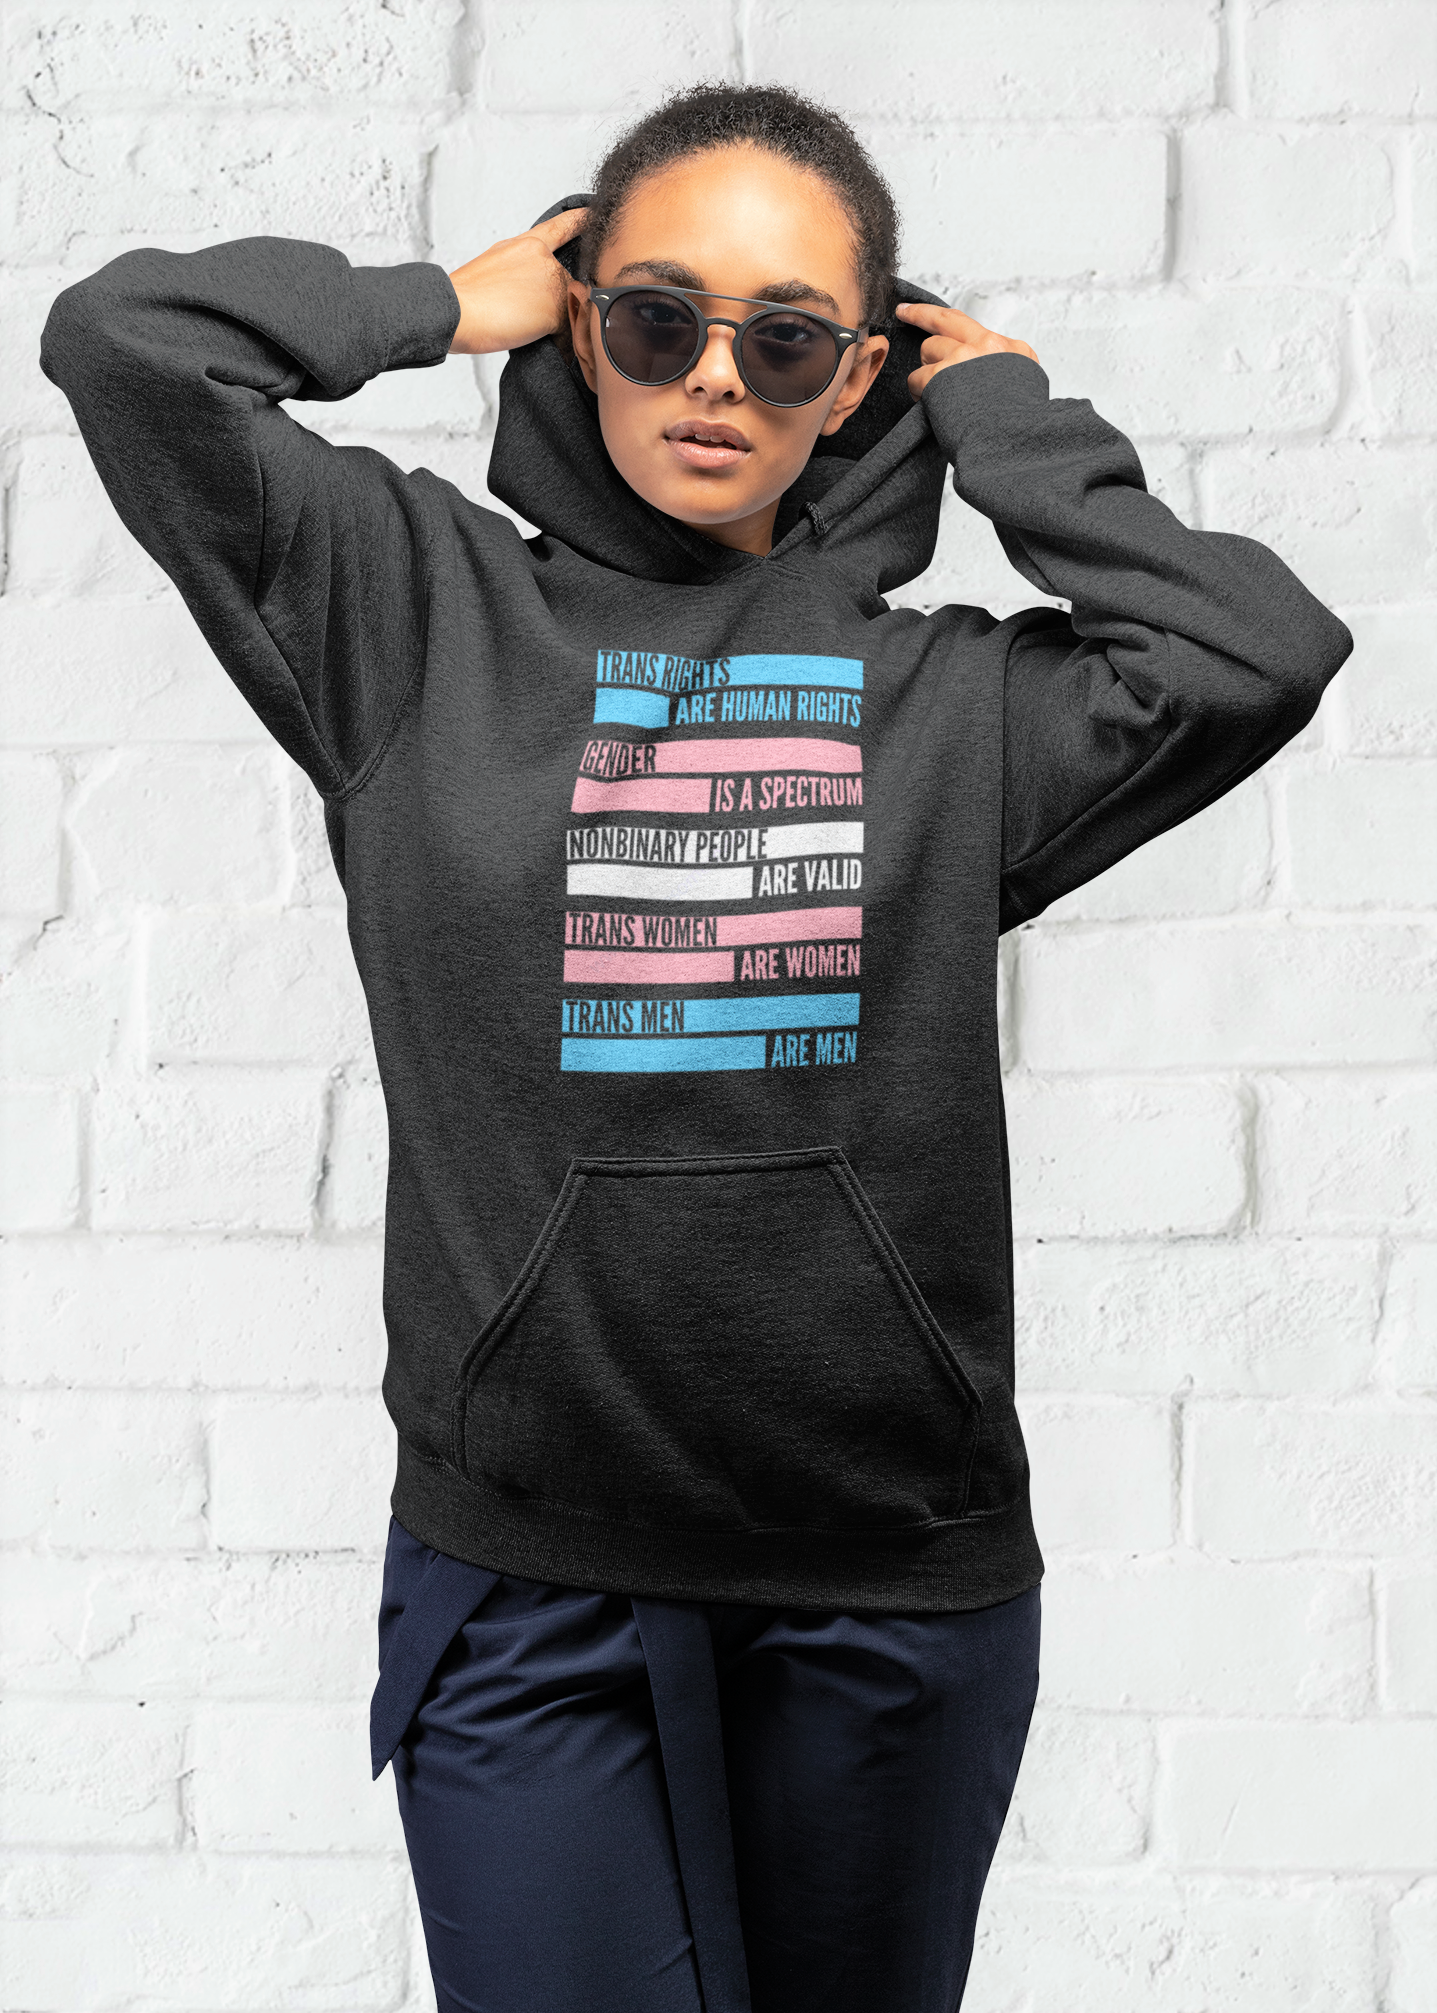 Gender Equality and Acceptance : Unisex Heavy Blend™ Hooded Sweatshirt